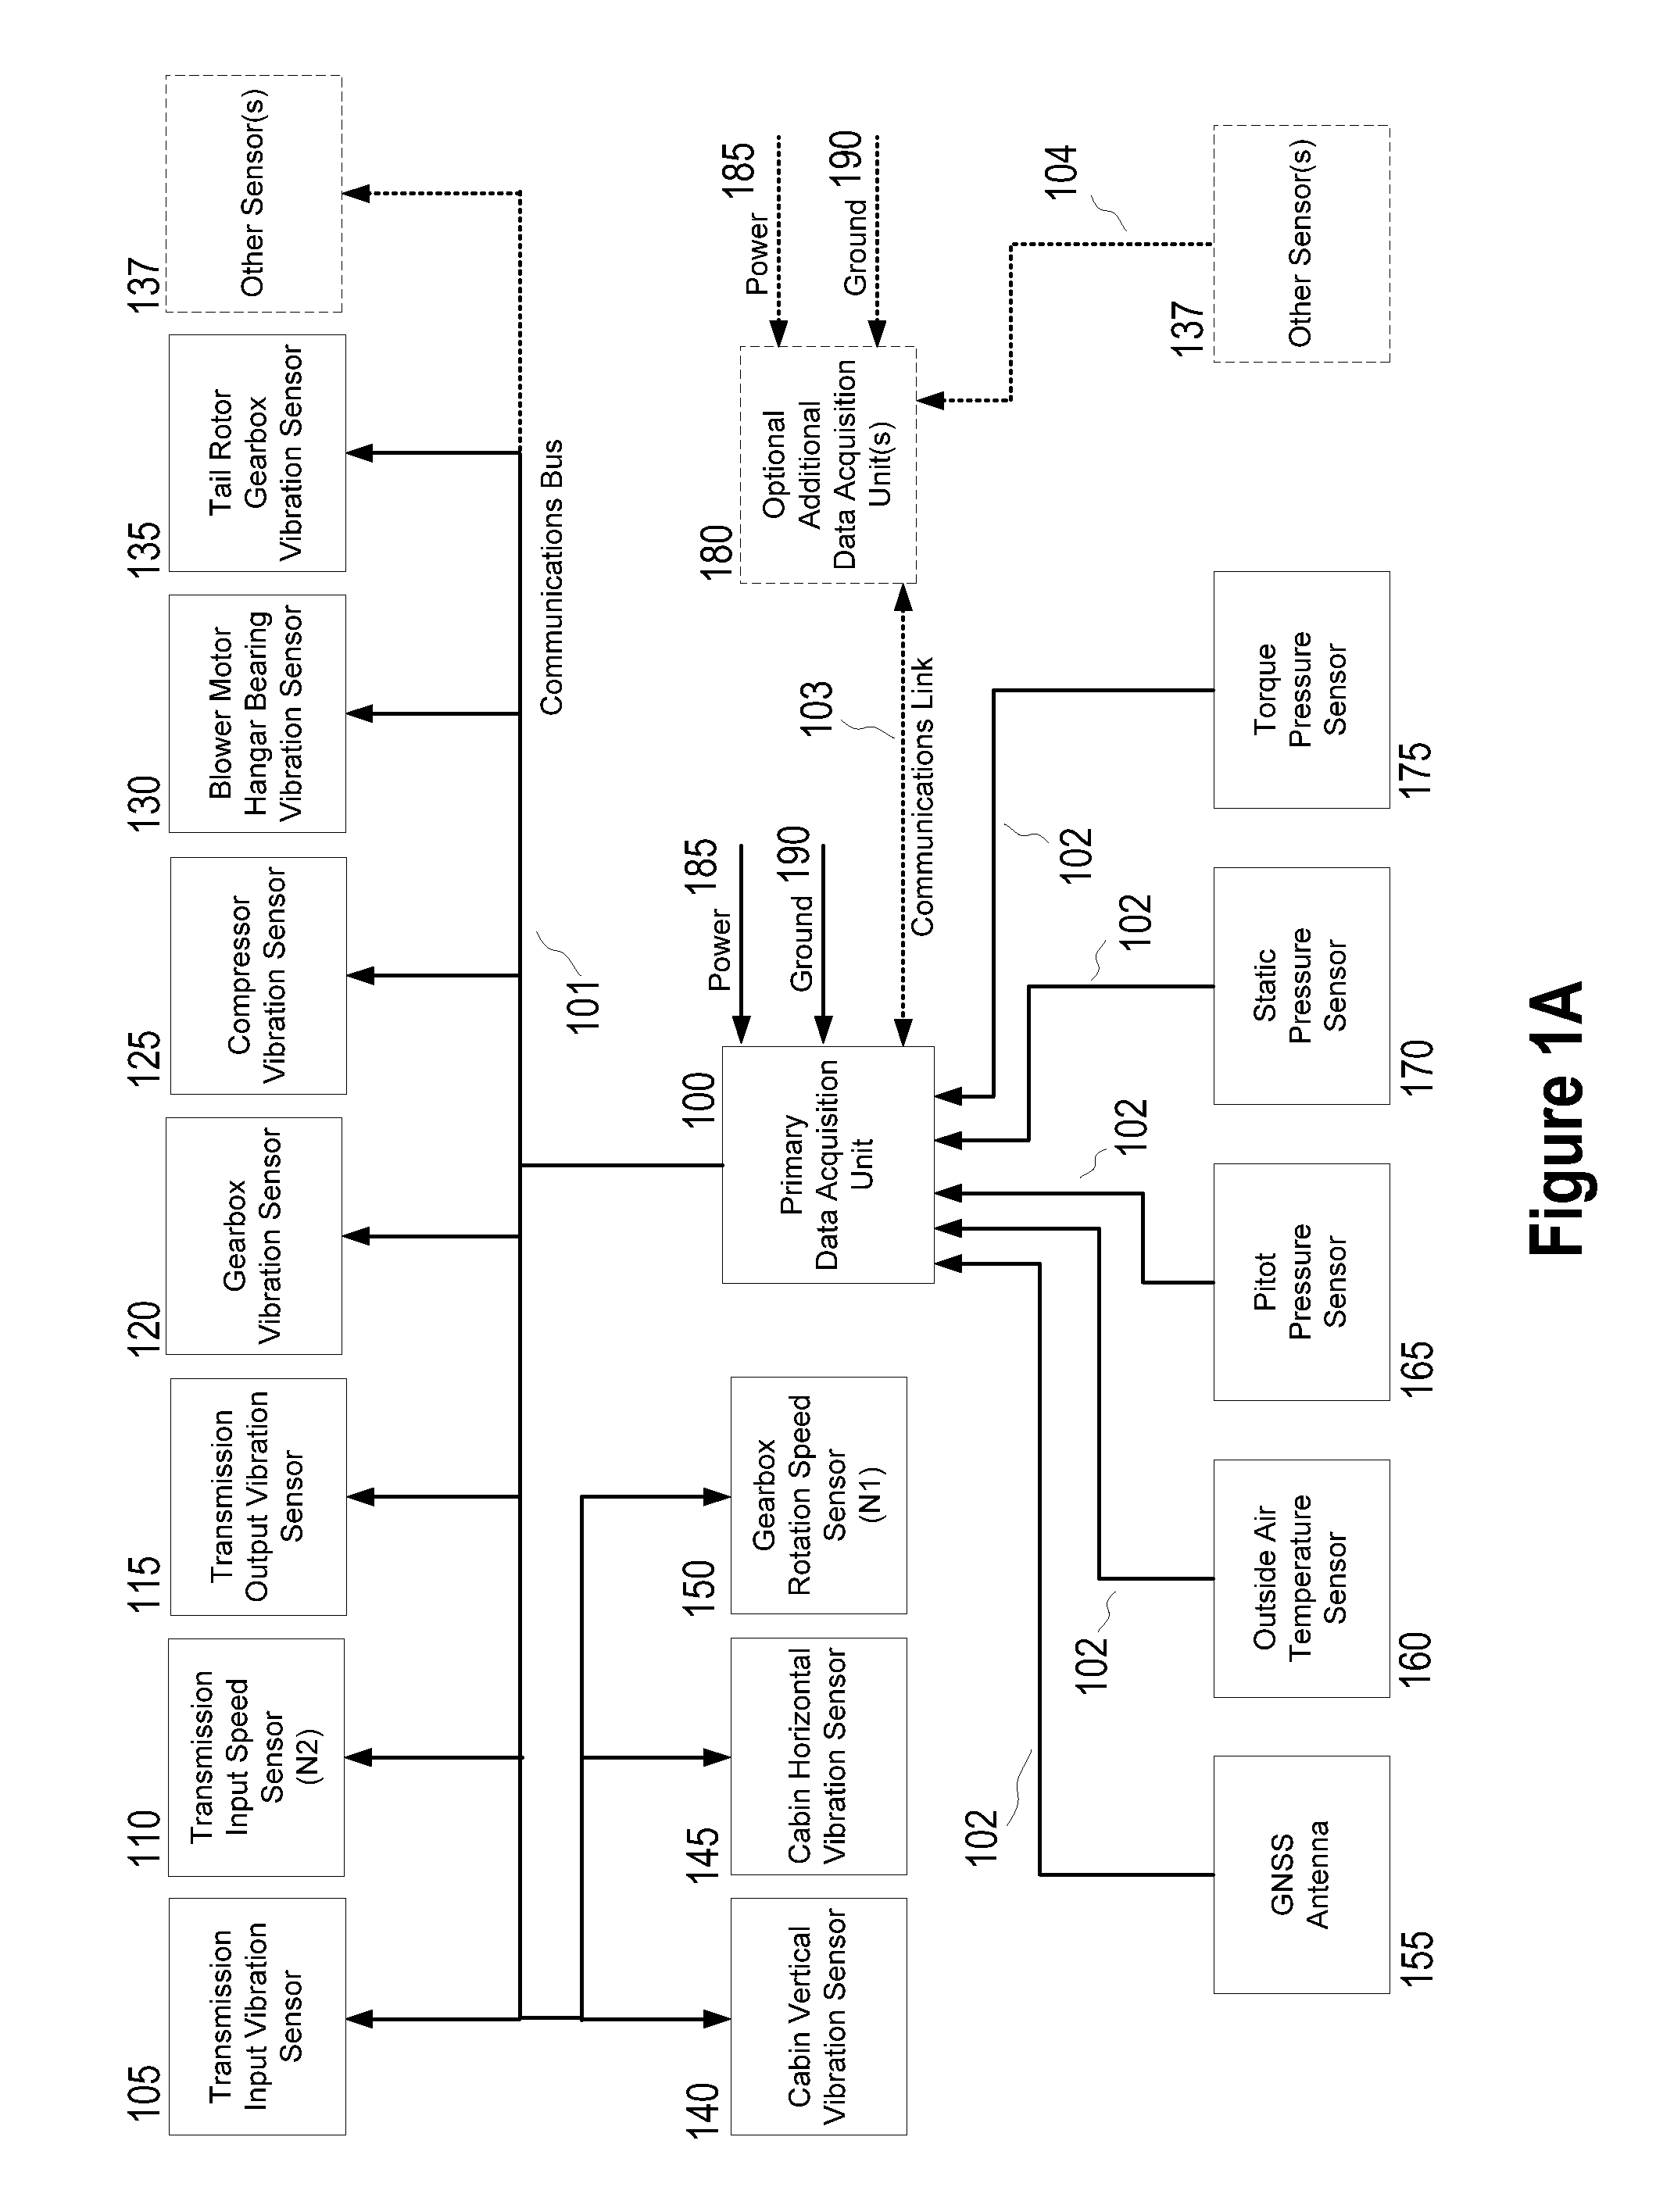 Frequency-adaptable structural health and usage monitoring system